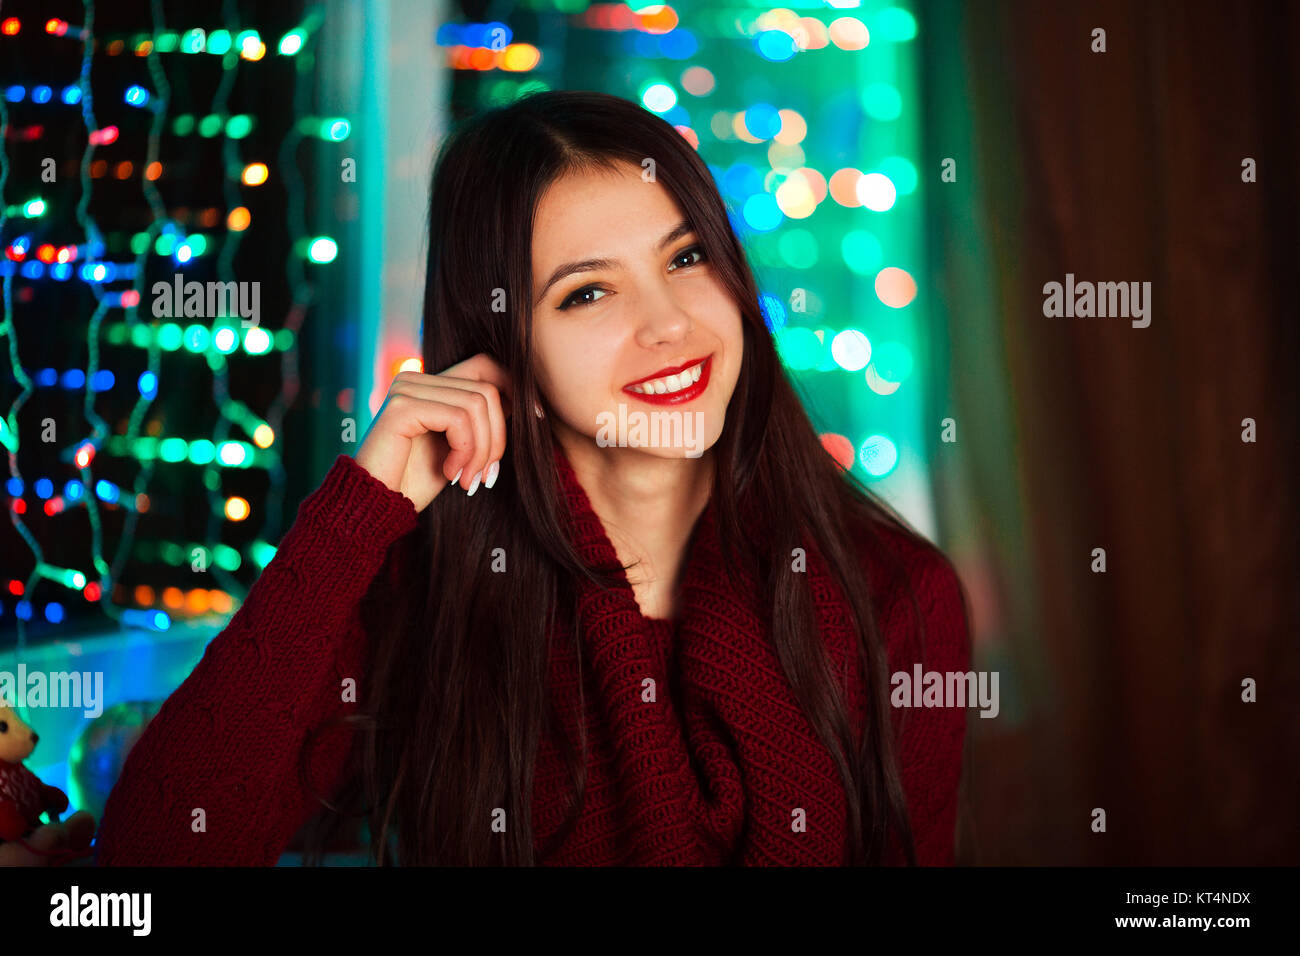 Picture of happy cheerful beautiful girl whit pretty white smile in studio with Christmas lights. Pretty smiling girl on colorful background with lights. Closeup portrait of nice girl with long hair. Stock Photo